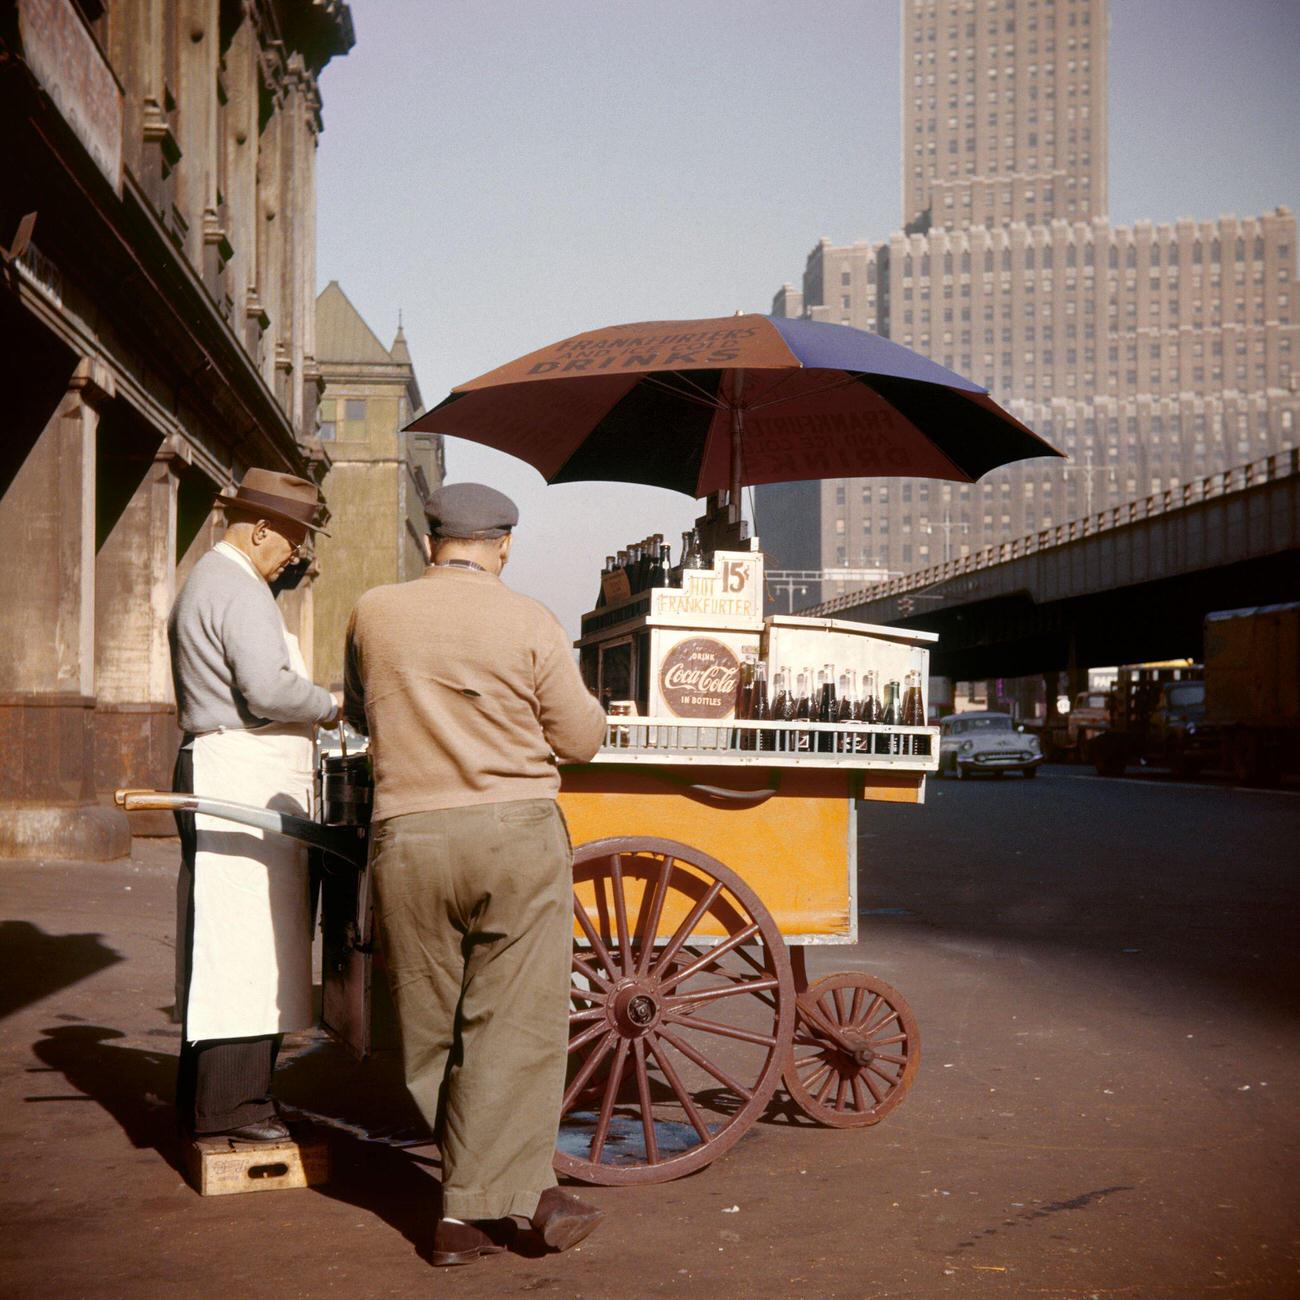 1950s hot dog vendor in downtown Manhattan, New York, USA, selling Cokes.